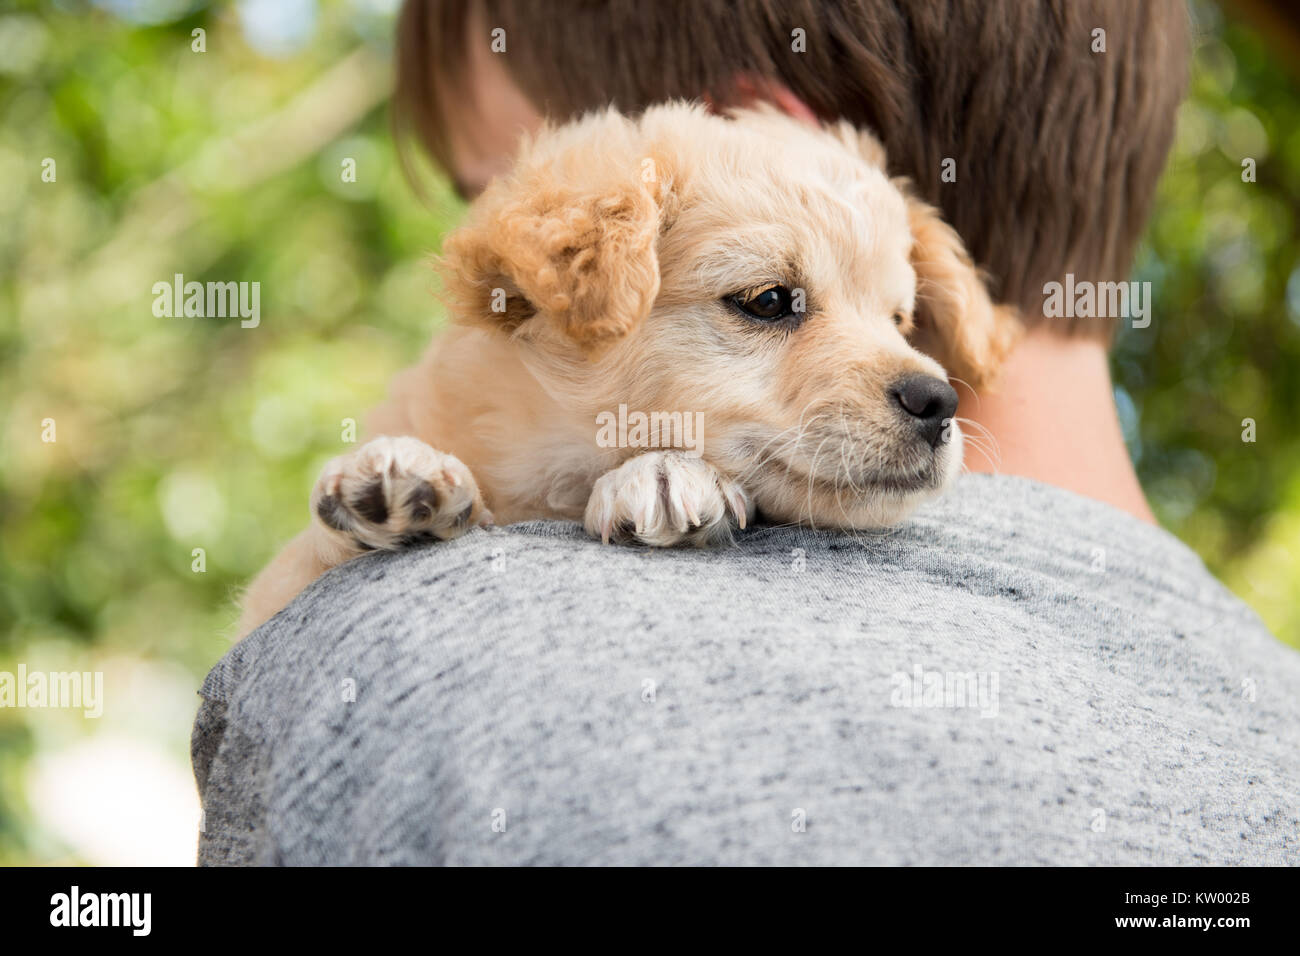 Tiny Little Puppy Being Held in Arms Stock Photo